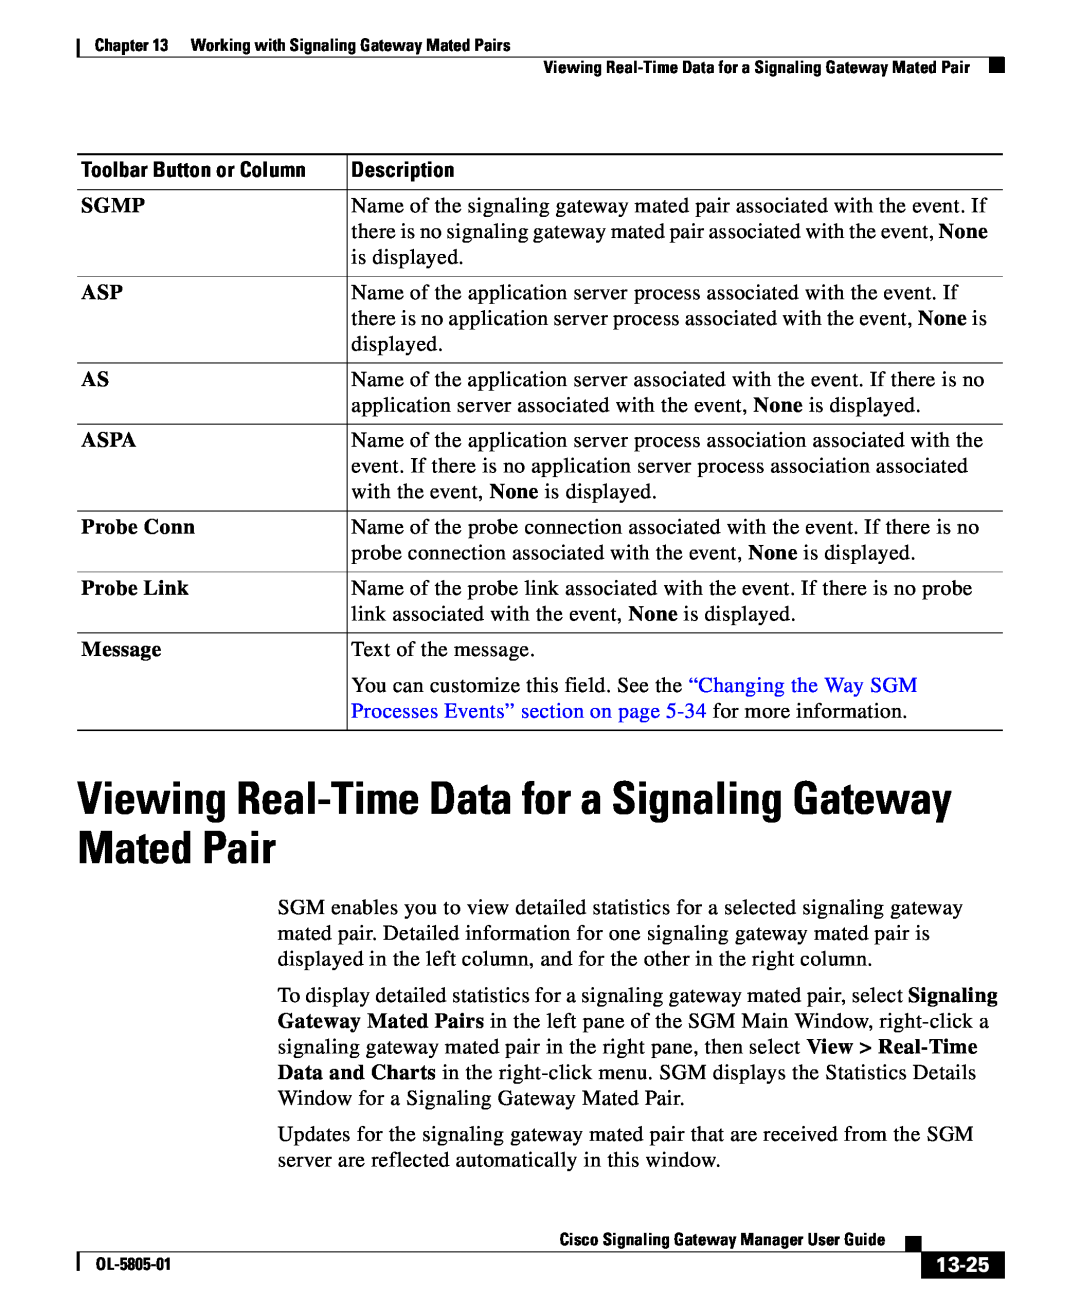 Cisco Systems OL-5805-01 manual Viewing Real-Time Data for a Signaling Gateway Mated Pair, 13-25, Toolbar Button or Column 